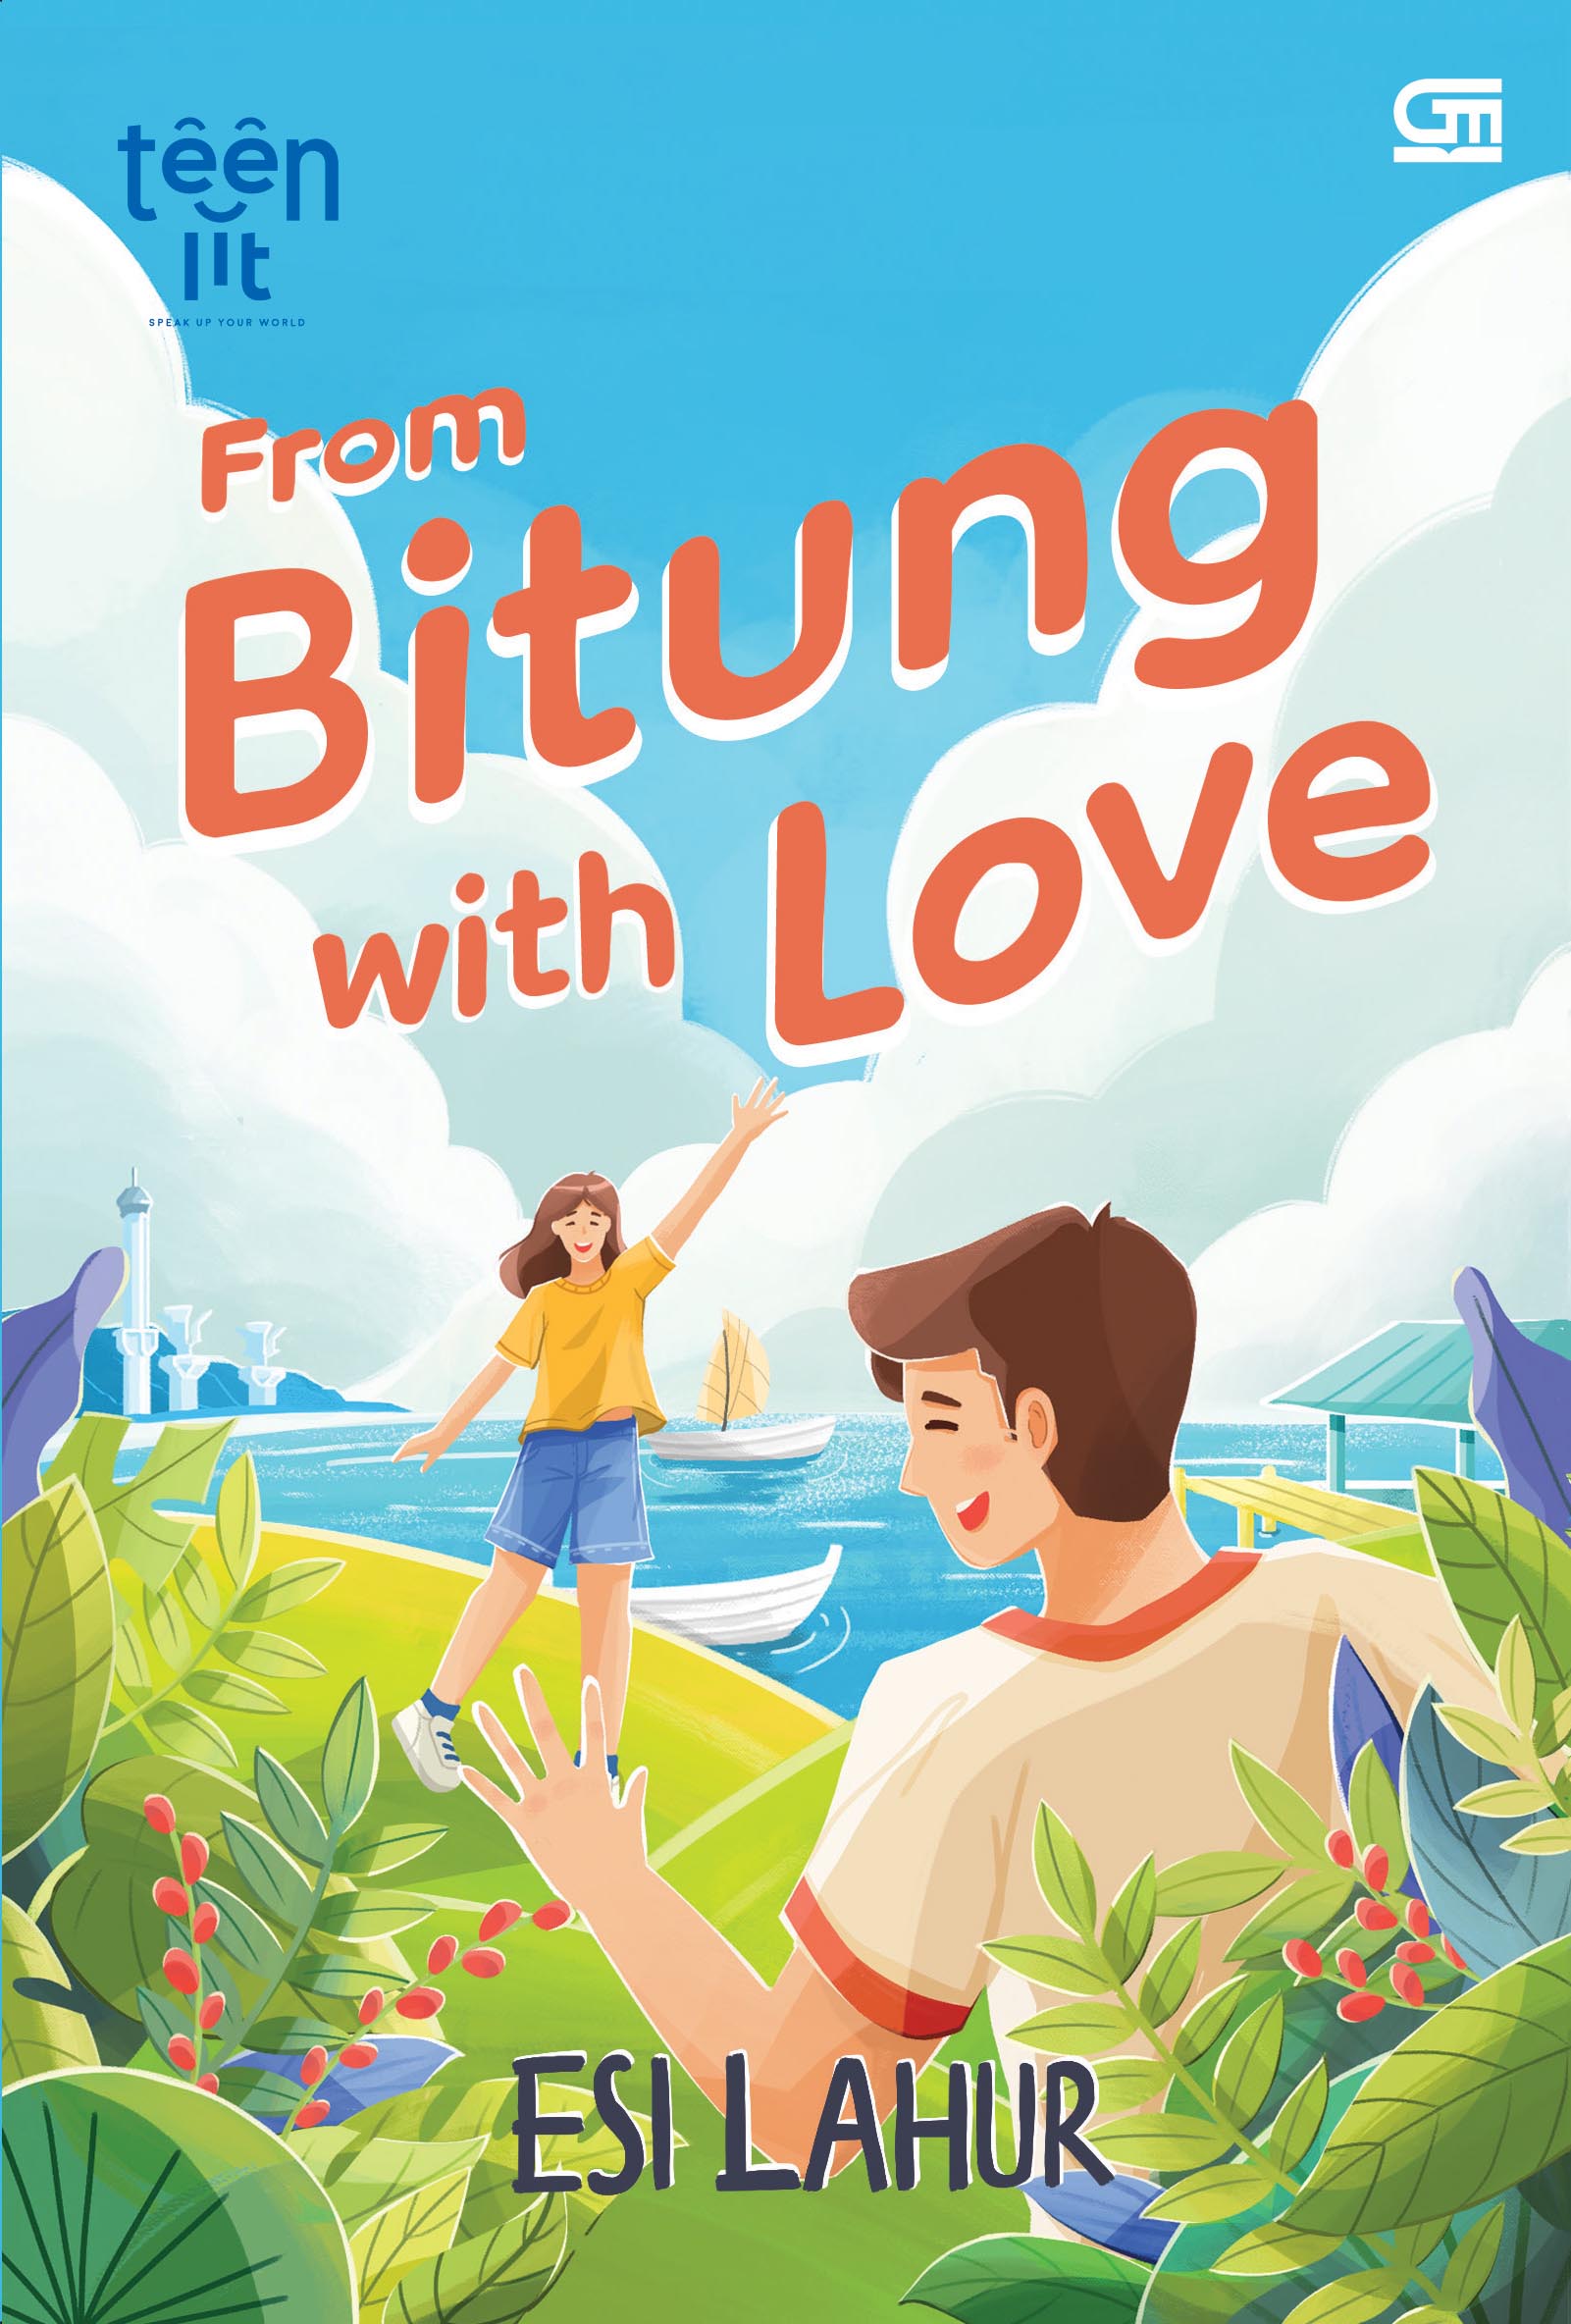 teenlit-from-bitung-with-love